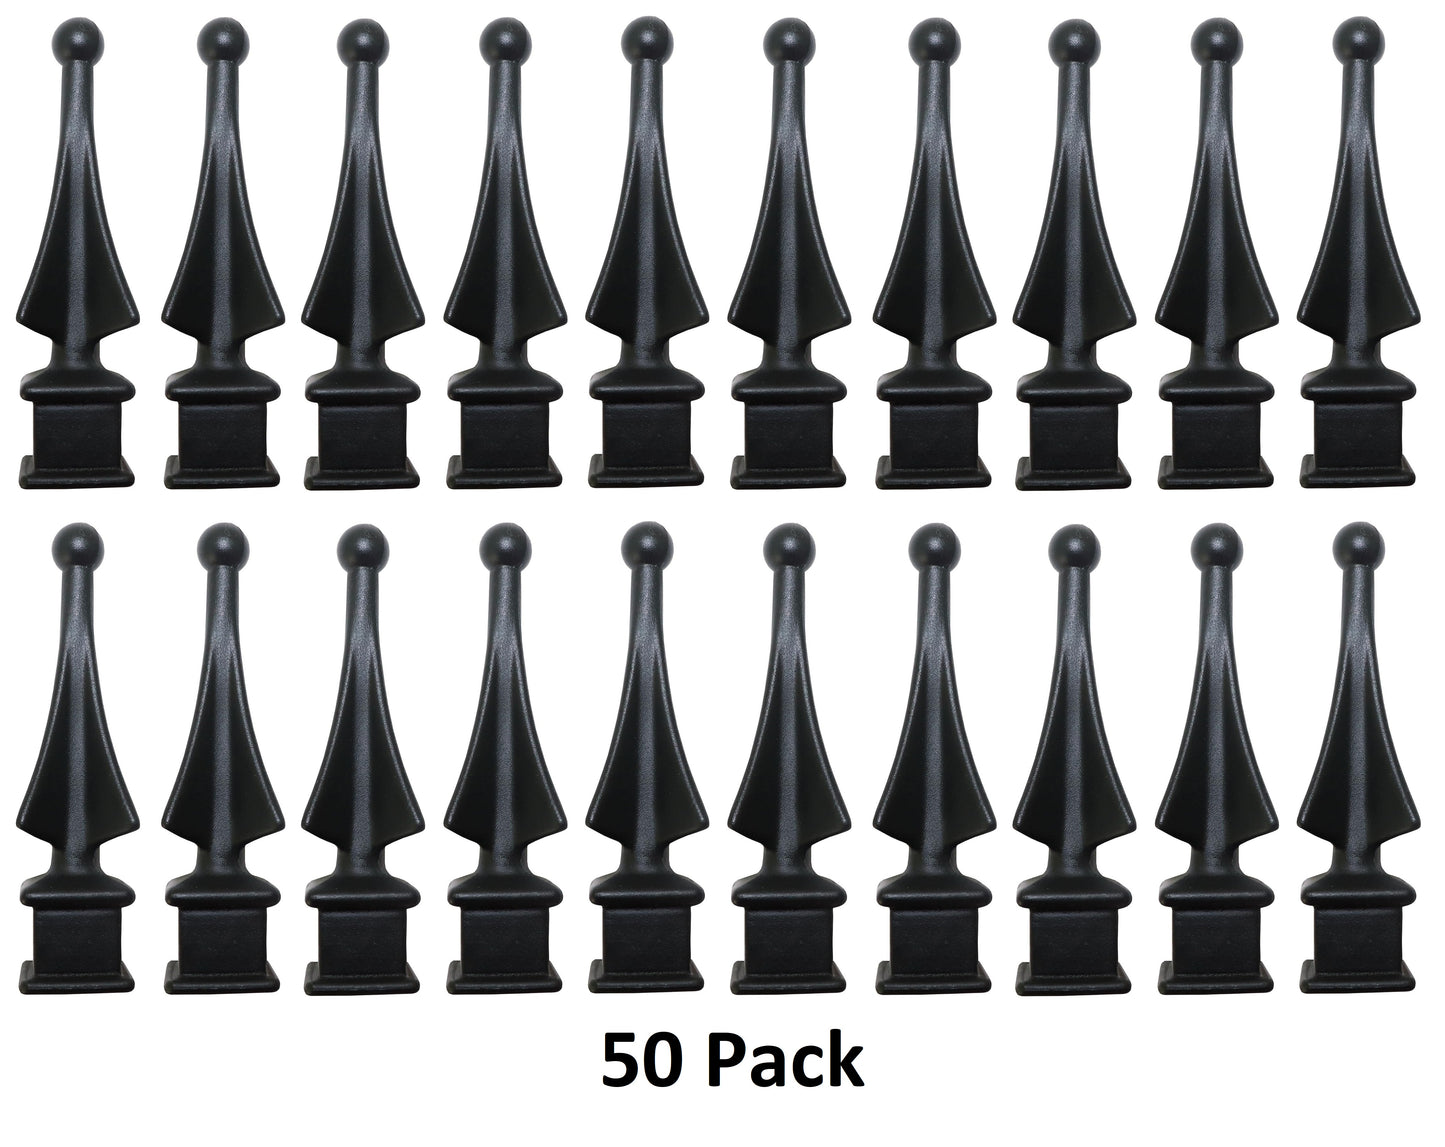 Black Plastic 5/8" Four-Sided Spire Wing Tip Finial Fence Topper for Iron Picket Fence 5/8" posts